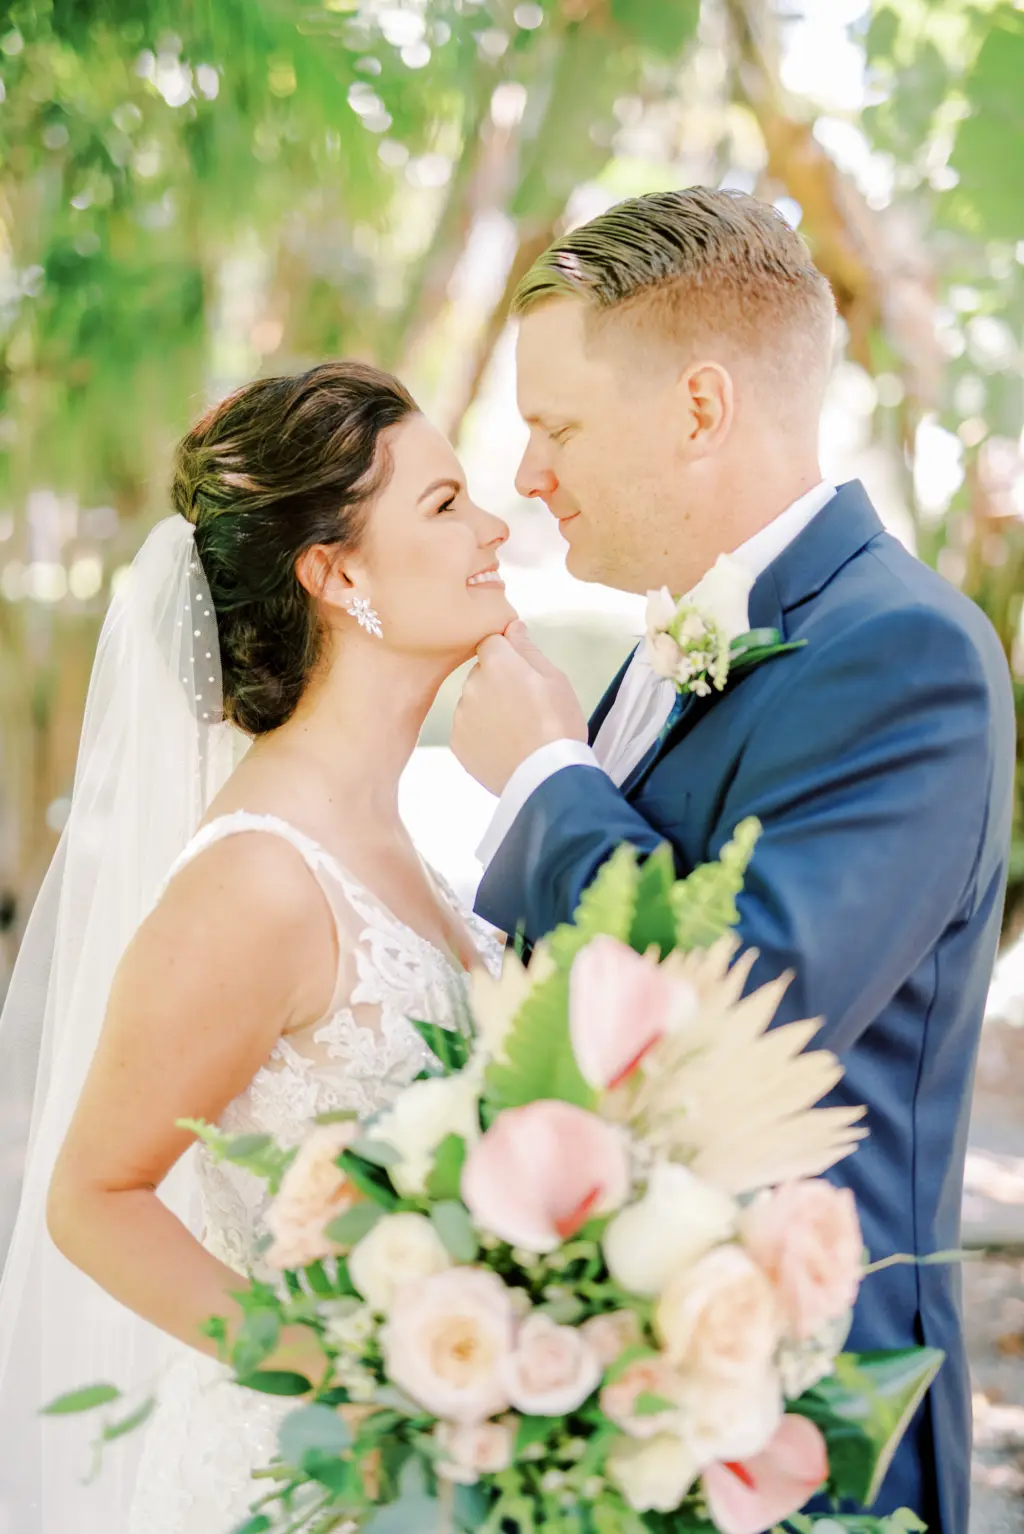 Bride and Groom First Look Wedding Portrait | St. Pete Planner and Florist Lemon Drops Weddings and Events | Hair and Makeup Artist Femme Akoi Beauty Studio